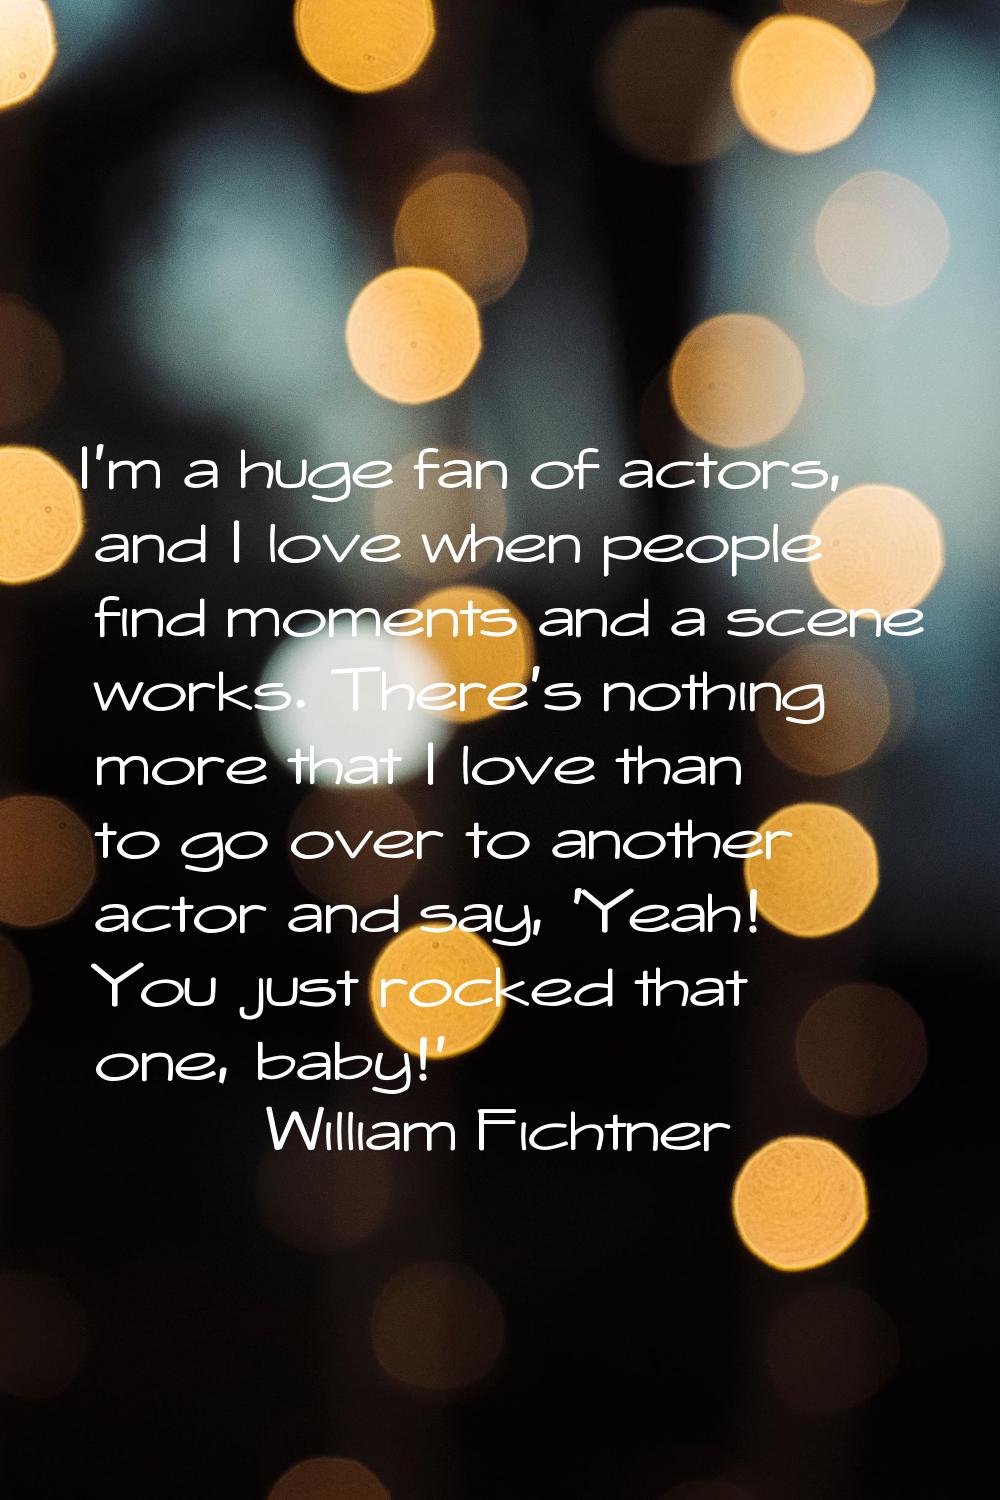 I'm a huge fan of actors, and I love when people find moments and a scene works. There's nothing mo